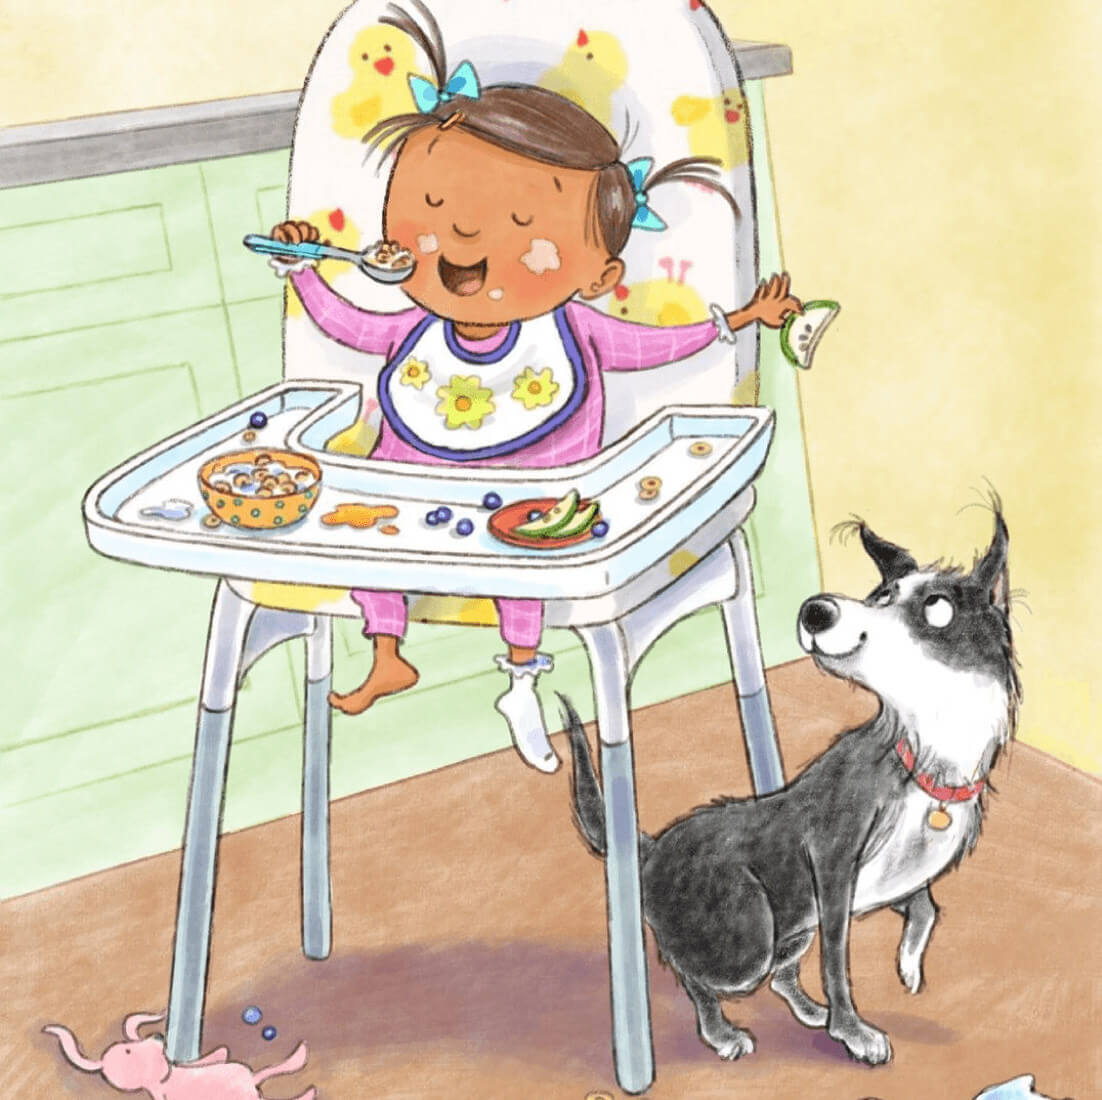 Baby in high chair eating and feeding some to the dog